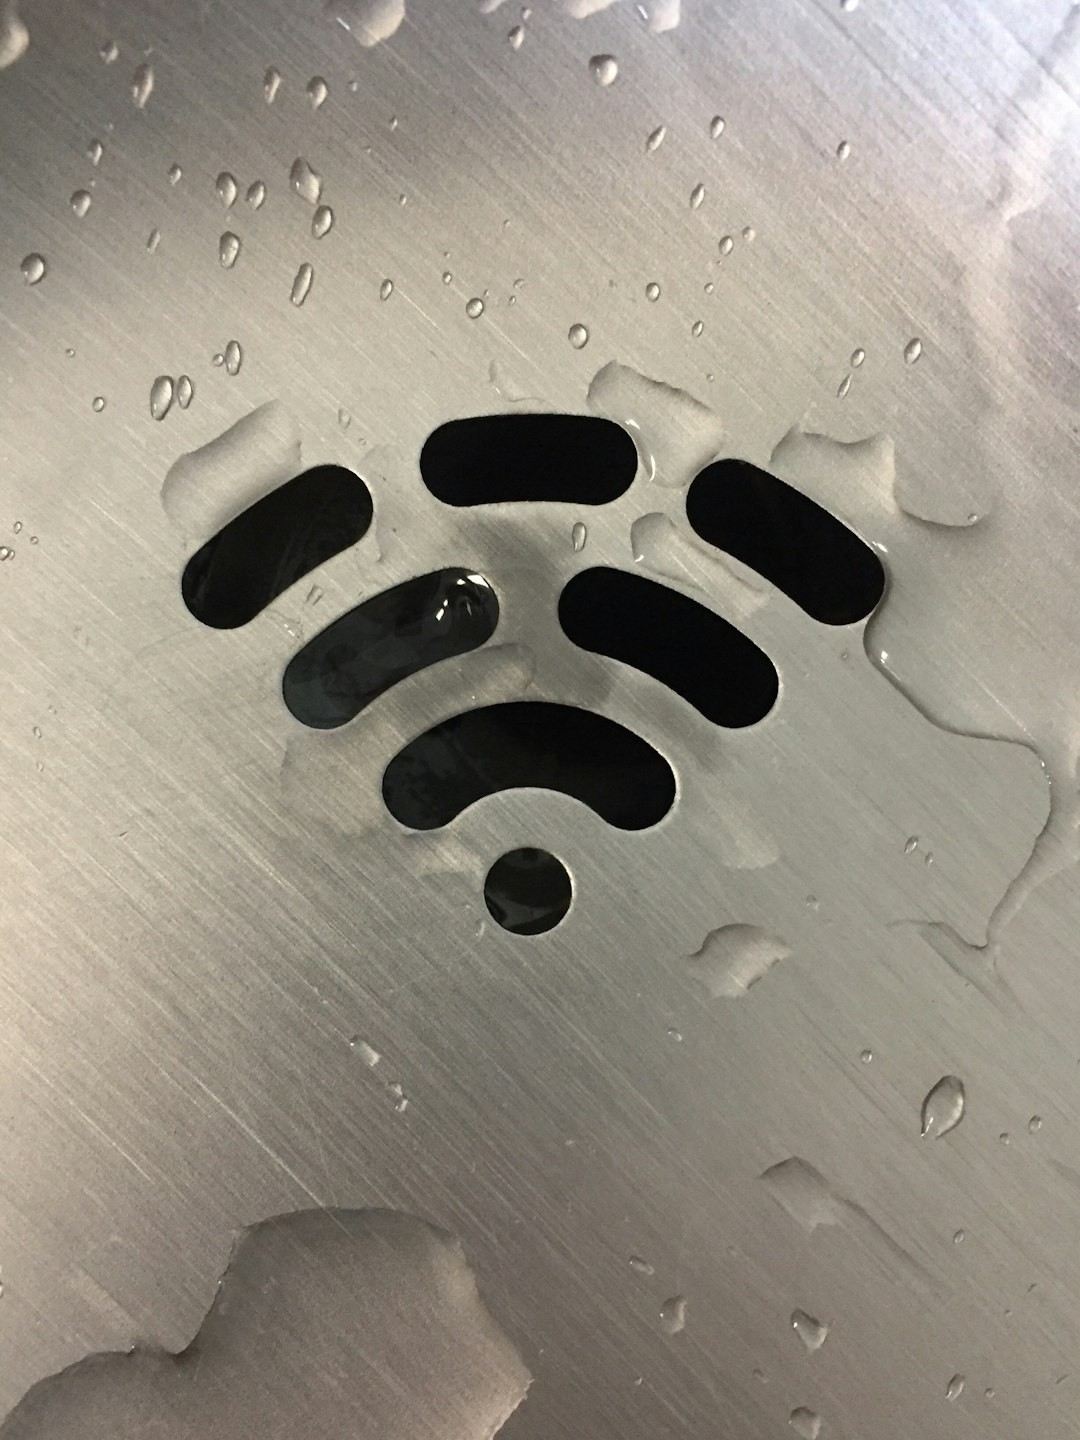 This is actually a water fountain drain that looks like the WiFi symbol.